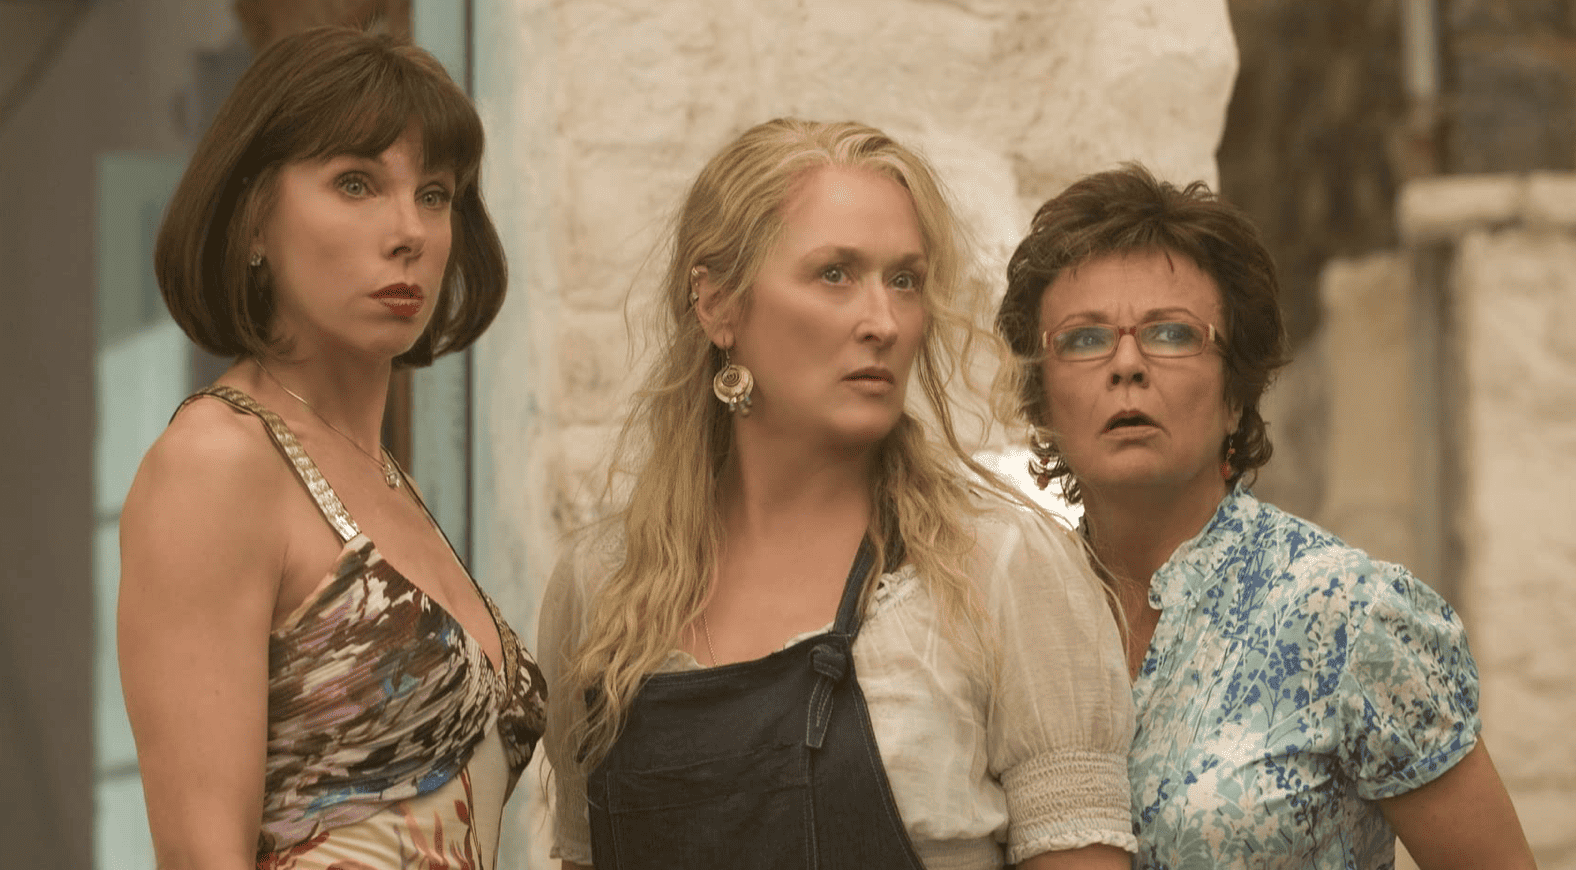 Christine Baranski, Meryl Streep, and Julie Walters stare off-camera in this image from Amazon Prime Video